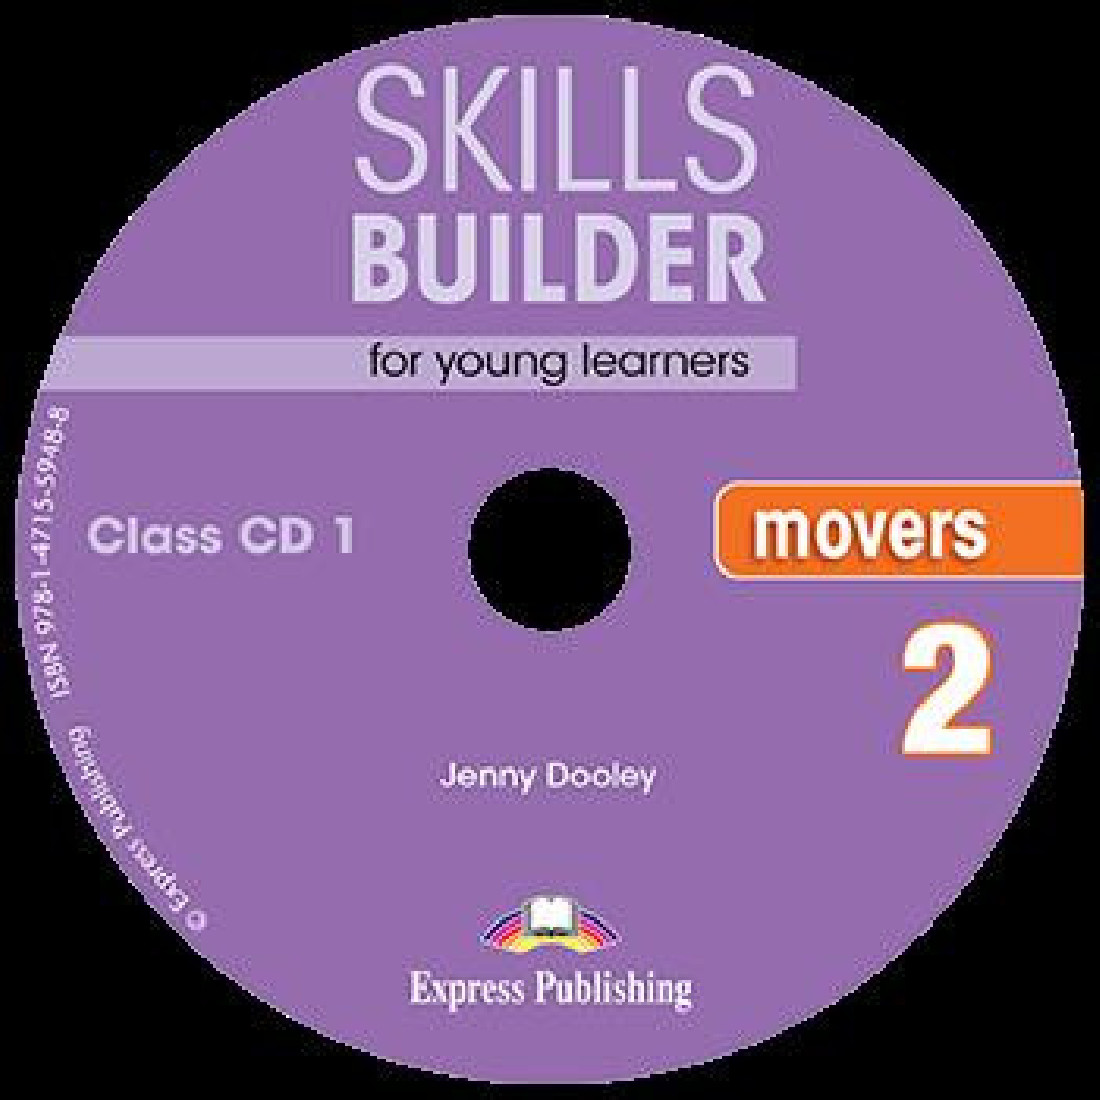 SKILLS BUILDER MOVERS 2 CD CLASS 2018